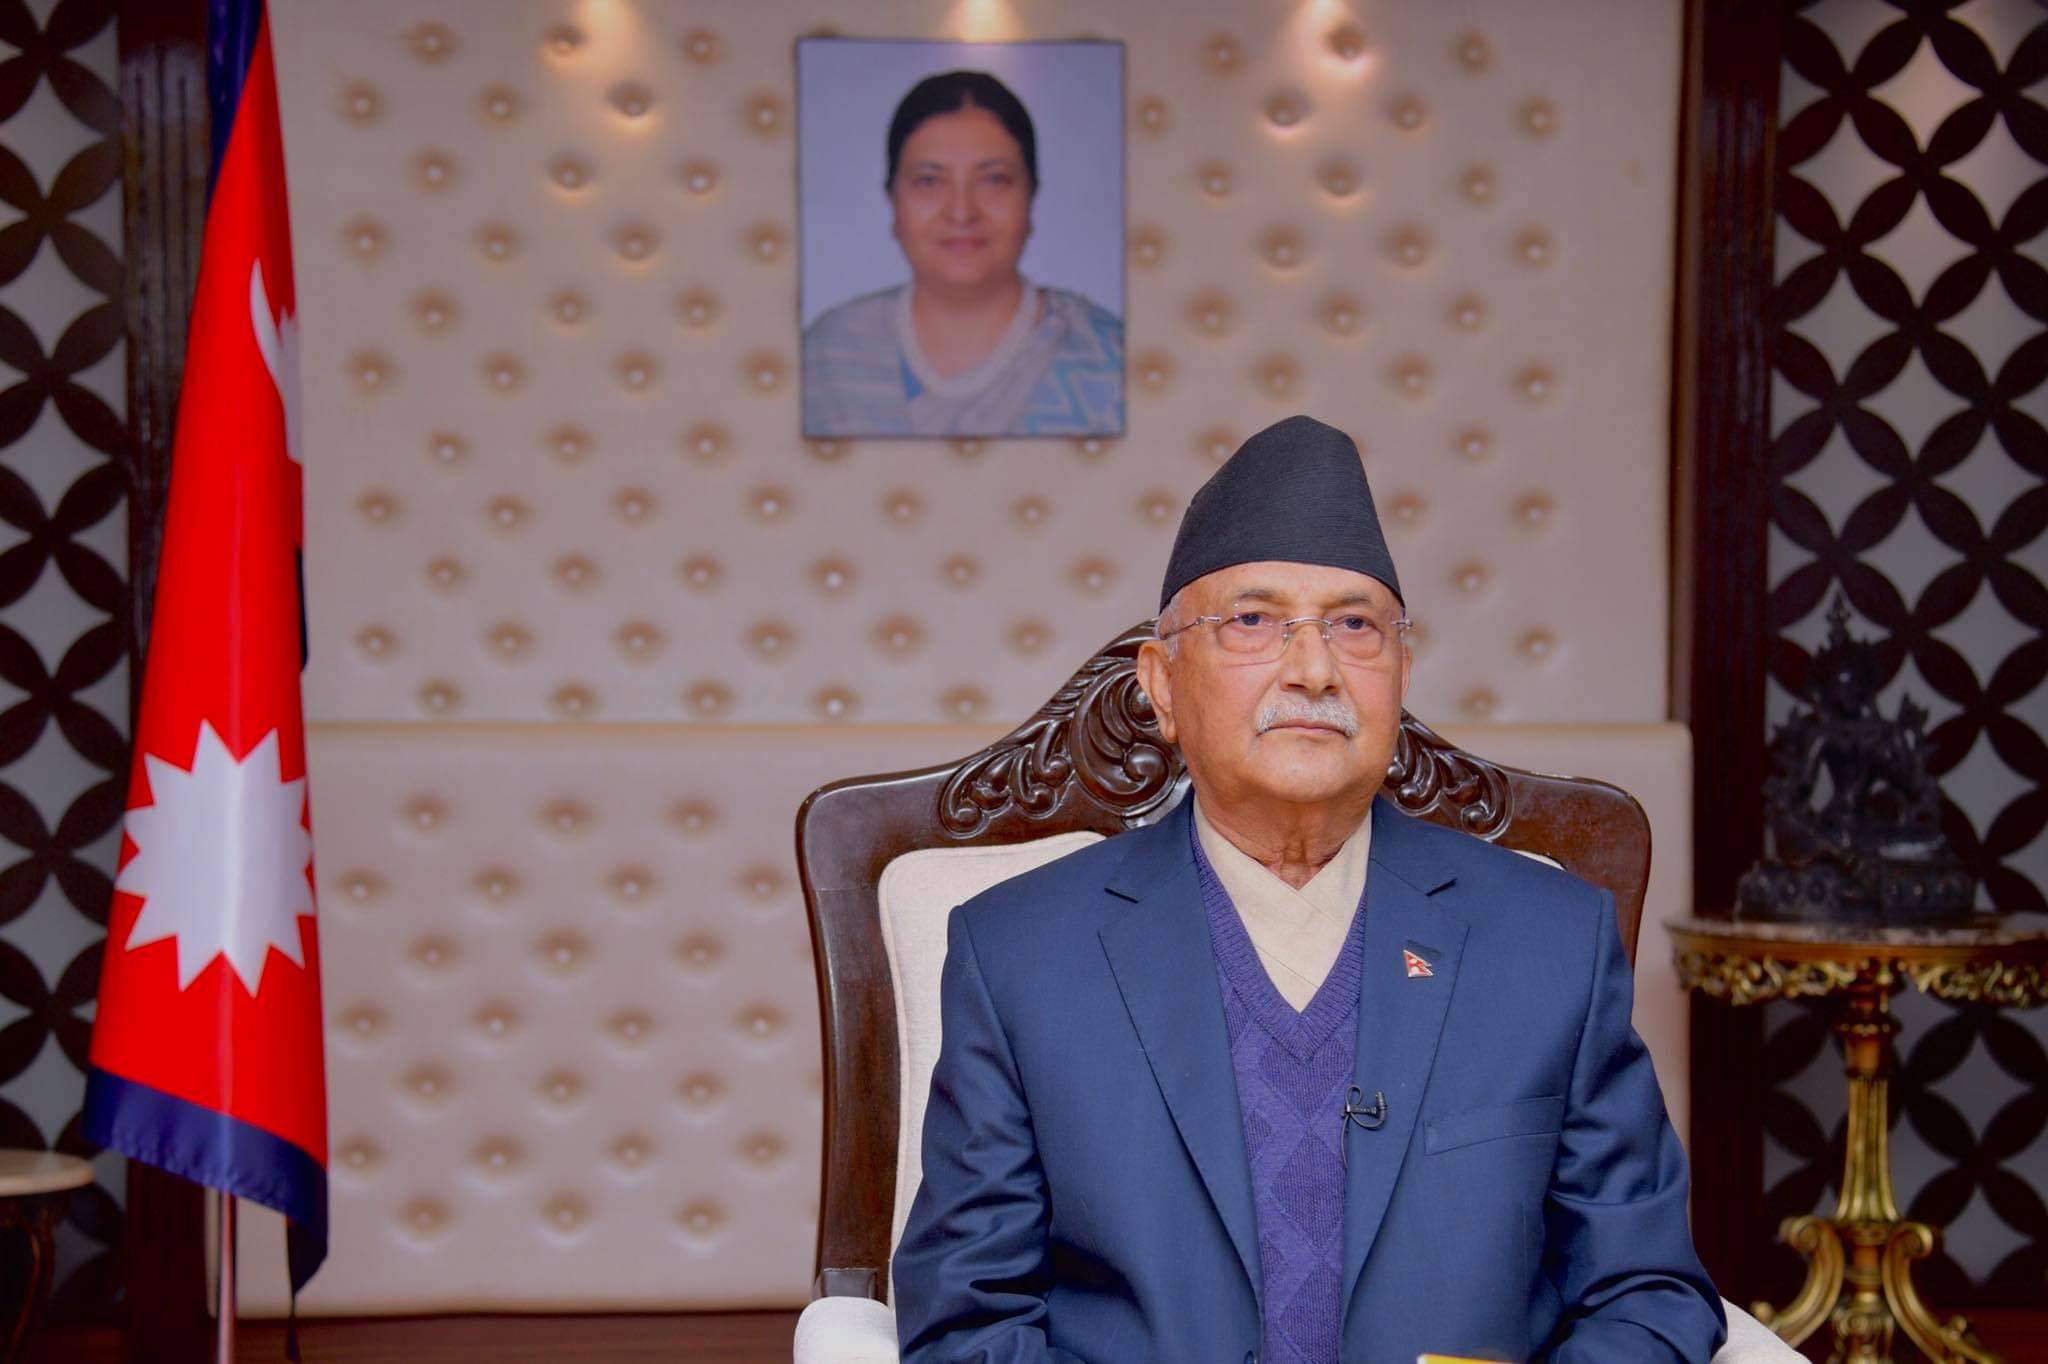 Parliament dissolution was not an abrupt decision: PM Oli (with video)